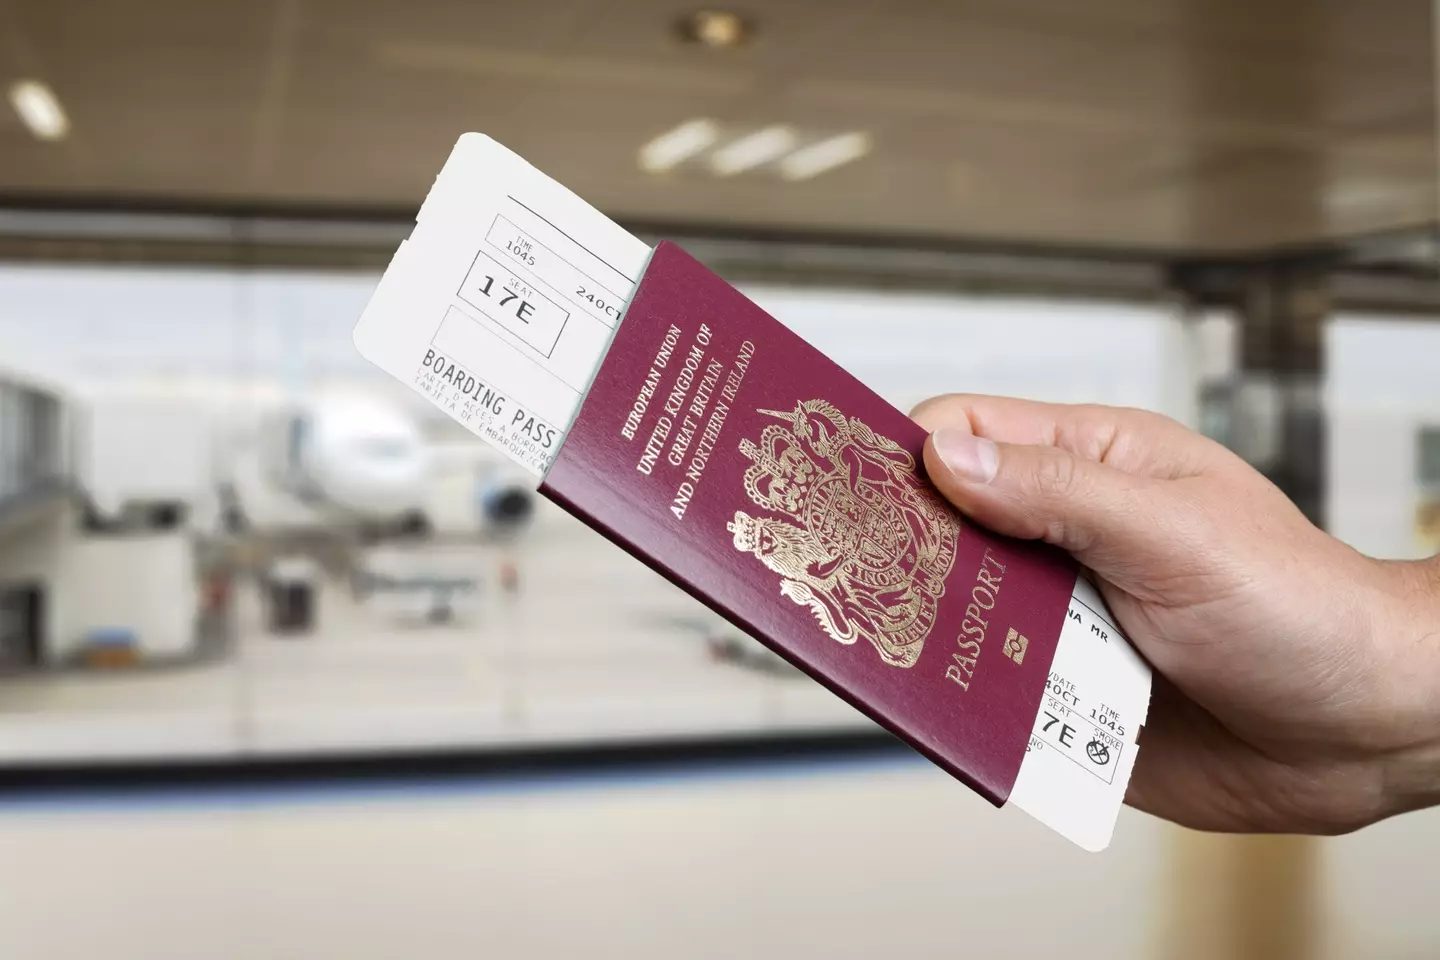 Previously, Brits have needed a passport to simply be in date to be able to travel in Europe (